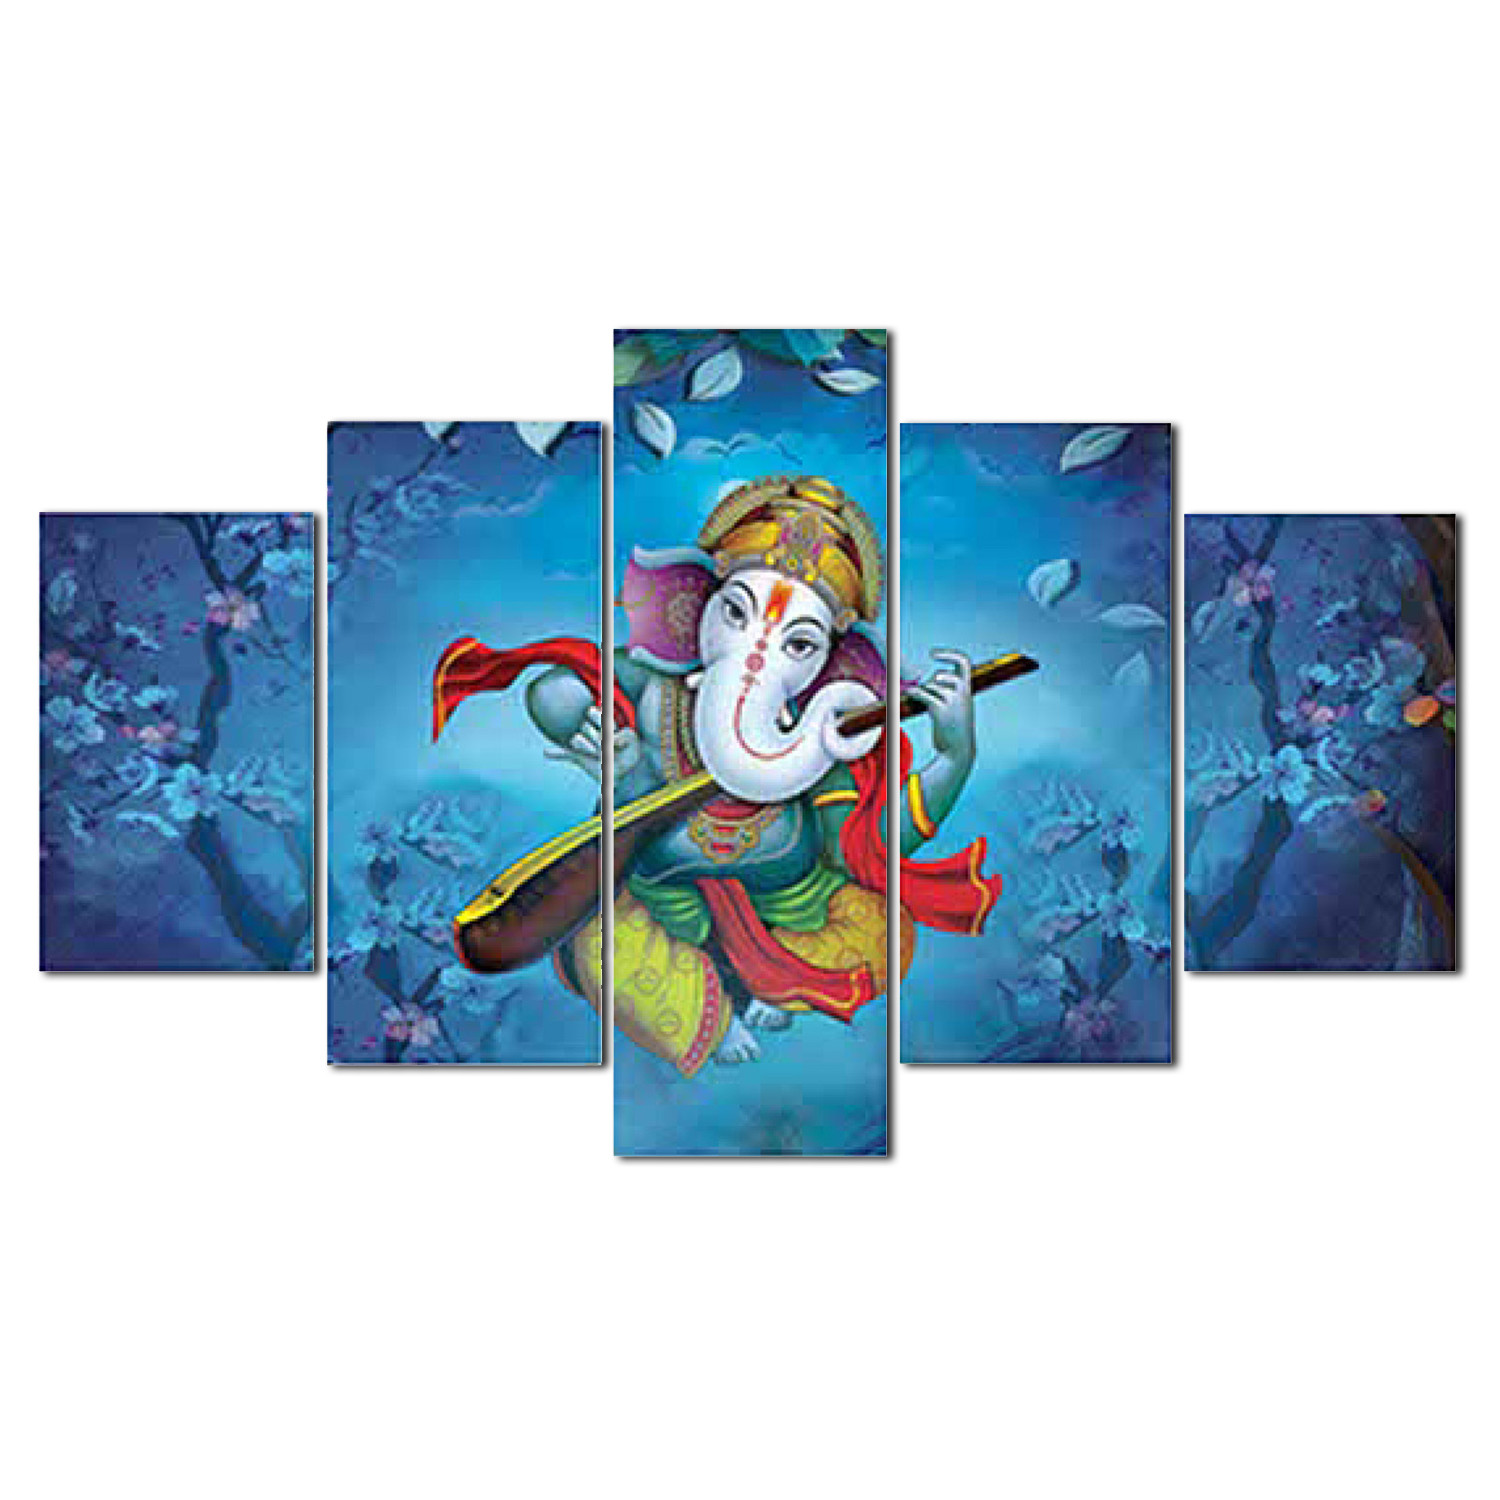 Kuber Industries Wall Paintings | MDF Wooden Wall Art for Living Room |Wall Sculpture | Lord Ganesha Painting for Bedroom | Office | Hotels | Gift | 1730KIG1 | Blue